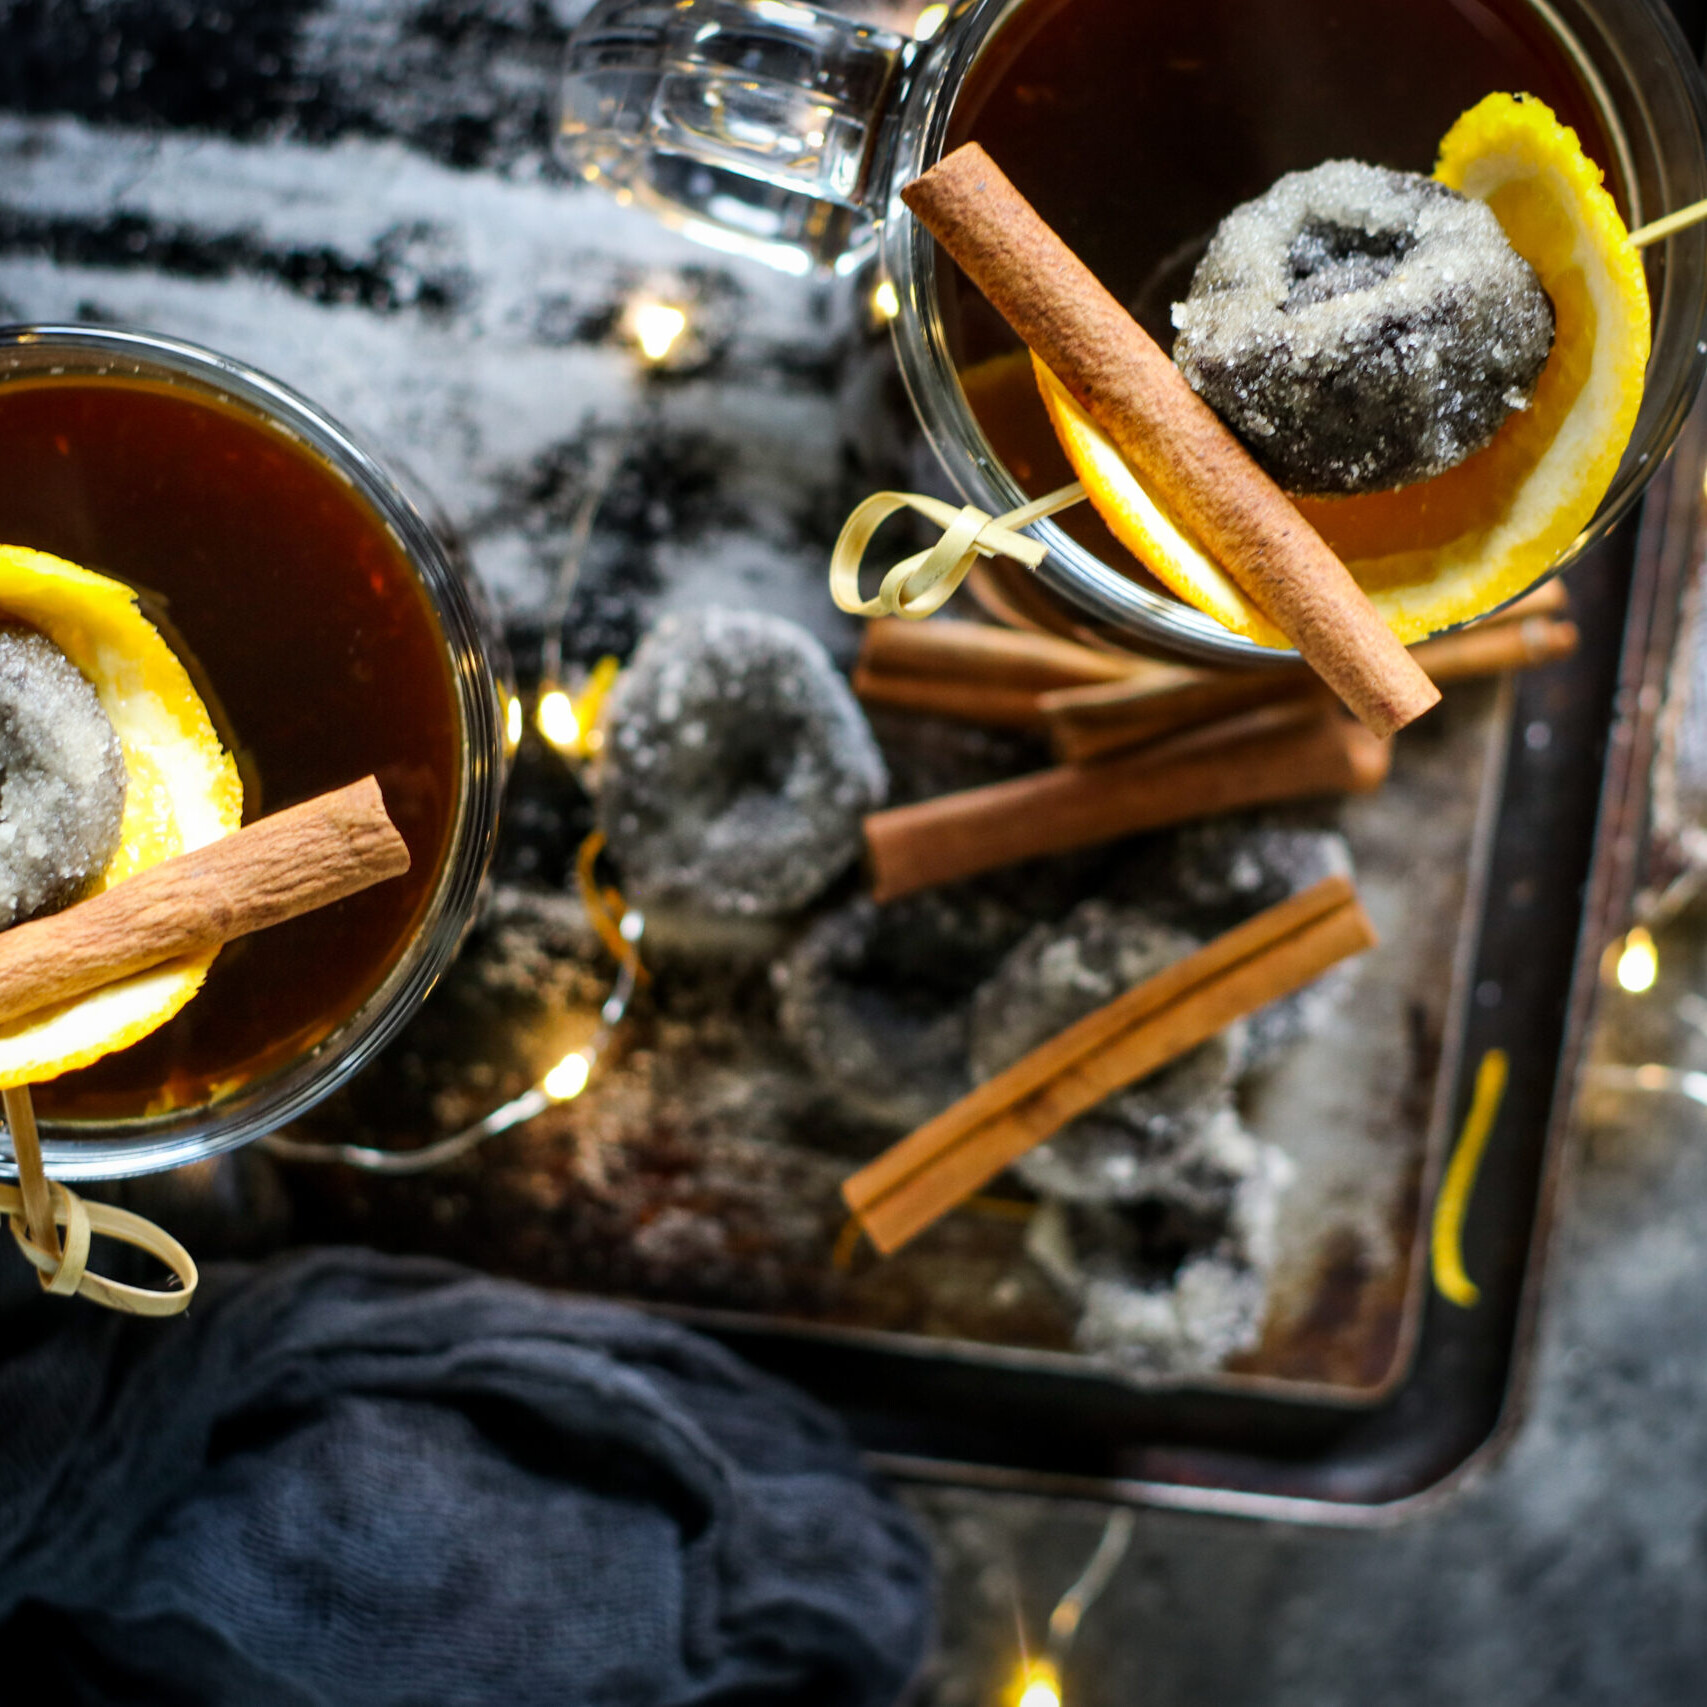 Two glasses of Warm Sugar Plum Cocktail combines the fragrant blend of spices, prune juice, and rum. Garnished with citrus peel and sugared California Prunes